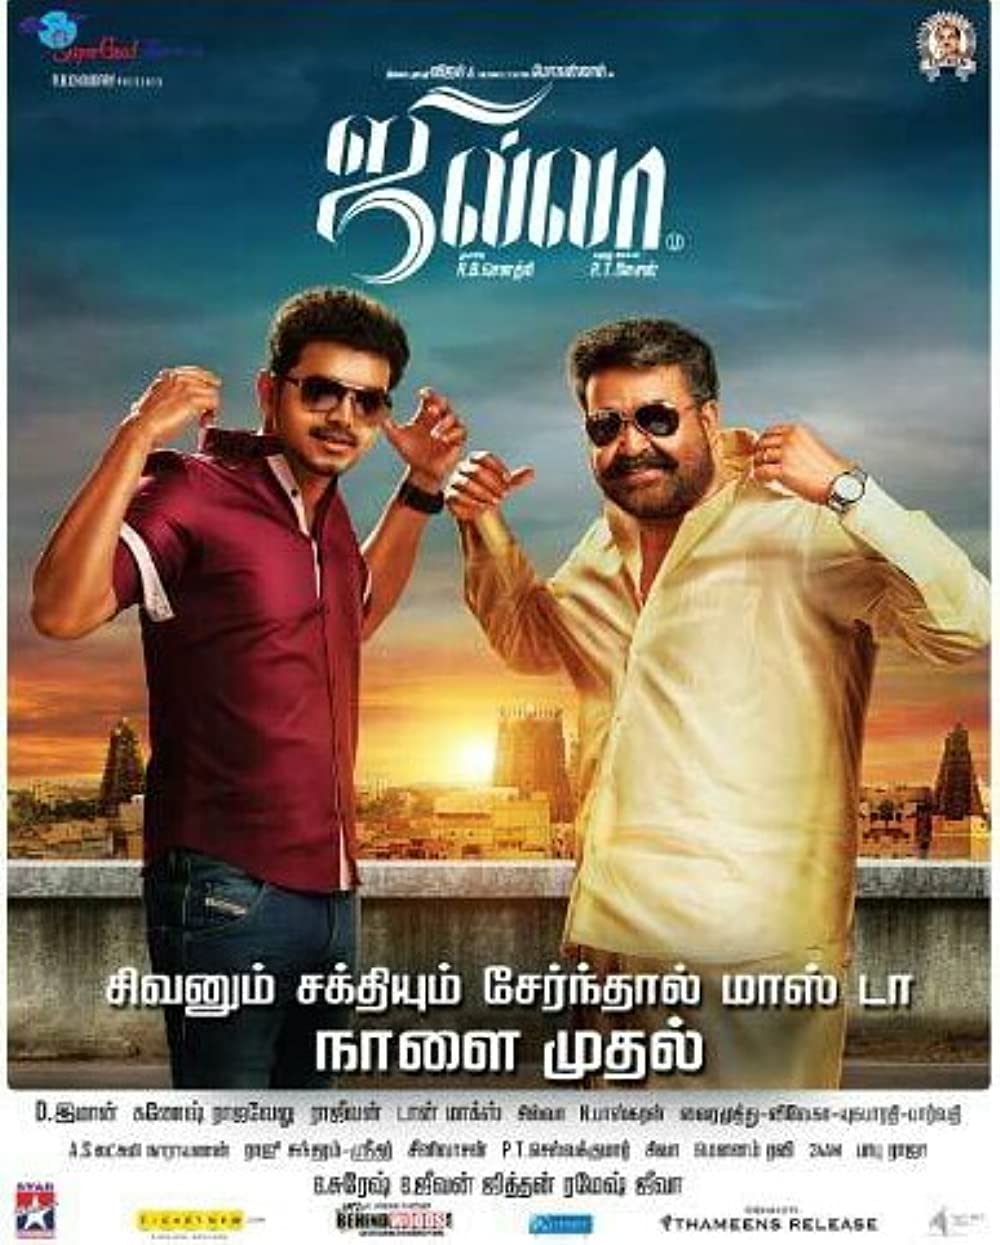 Jilla Movie (2014) Cast, Release Date, Story, Budget, Collection, Poster, Trailer, Review